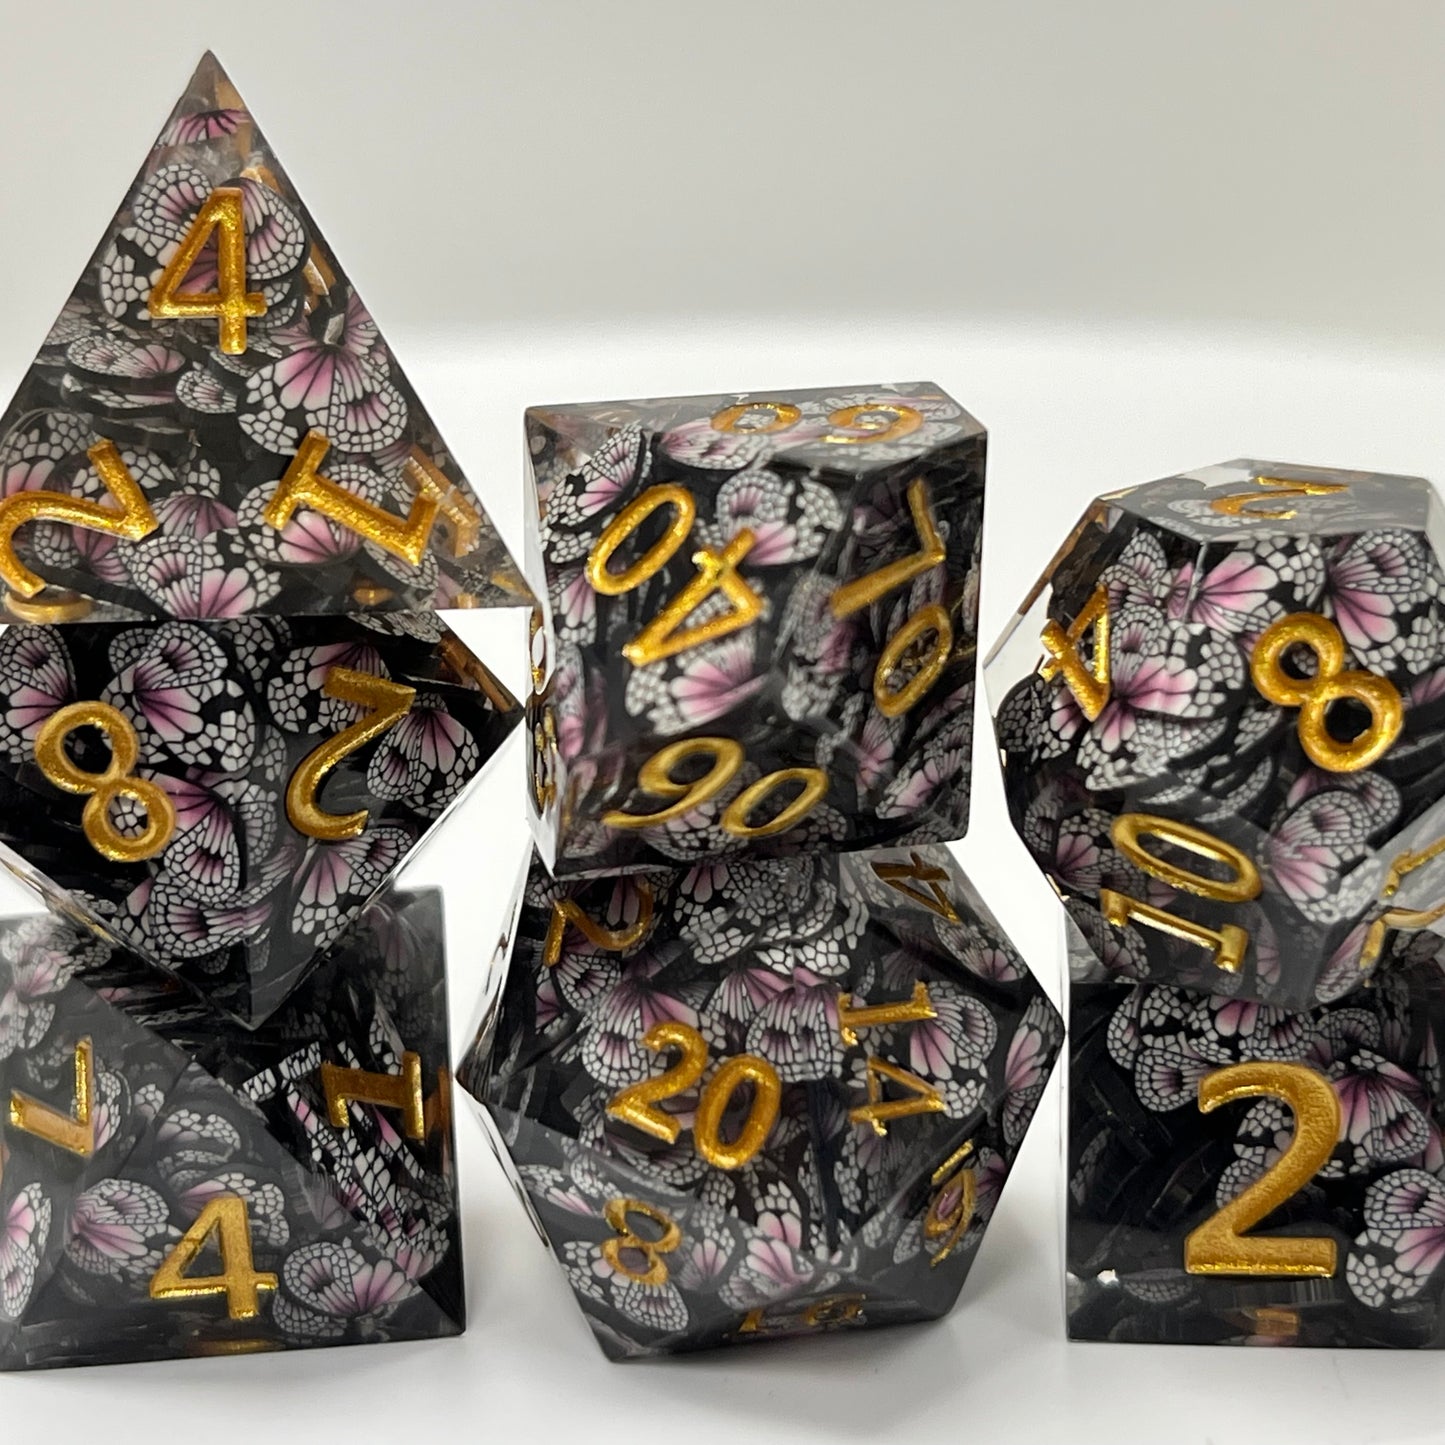 butterfly dnd TTRPG dice set for role playing games, dice goblin collectors